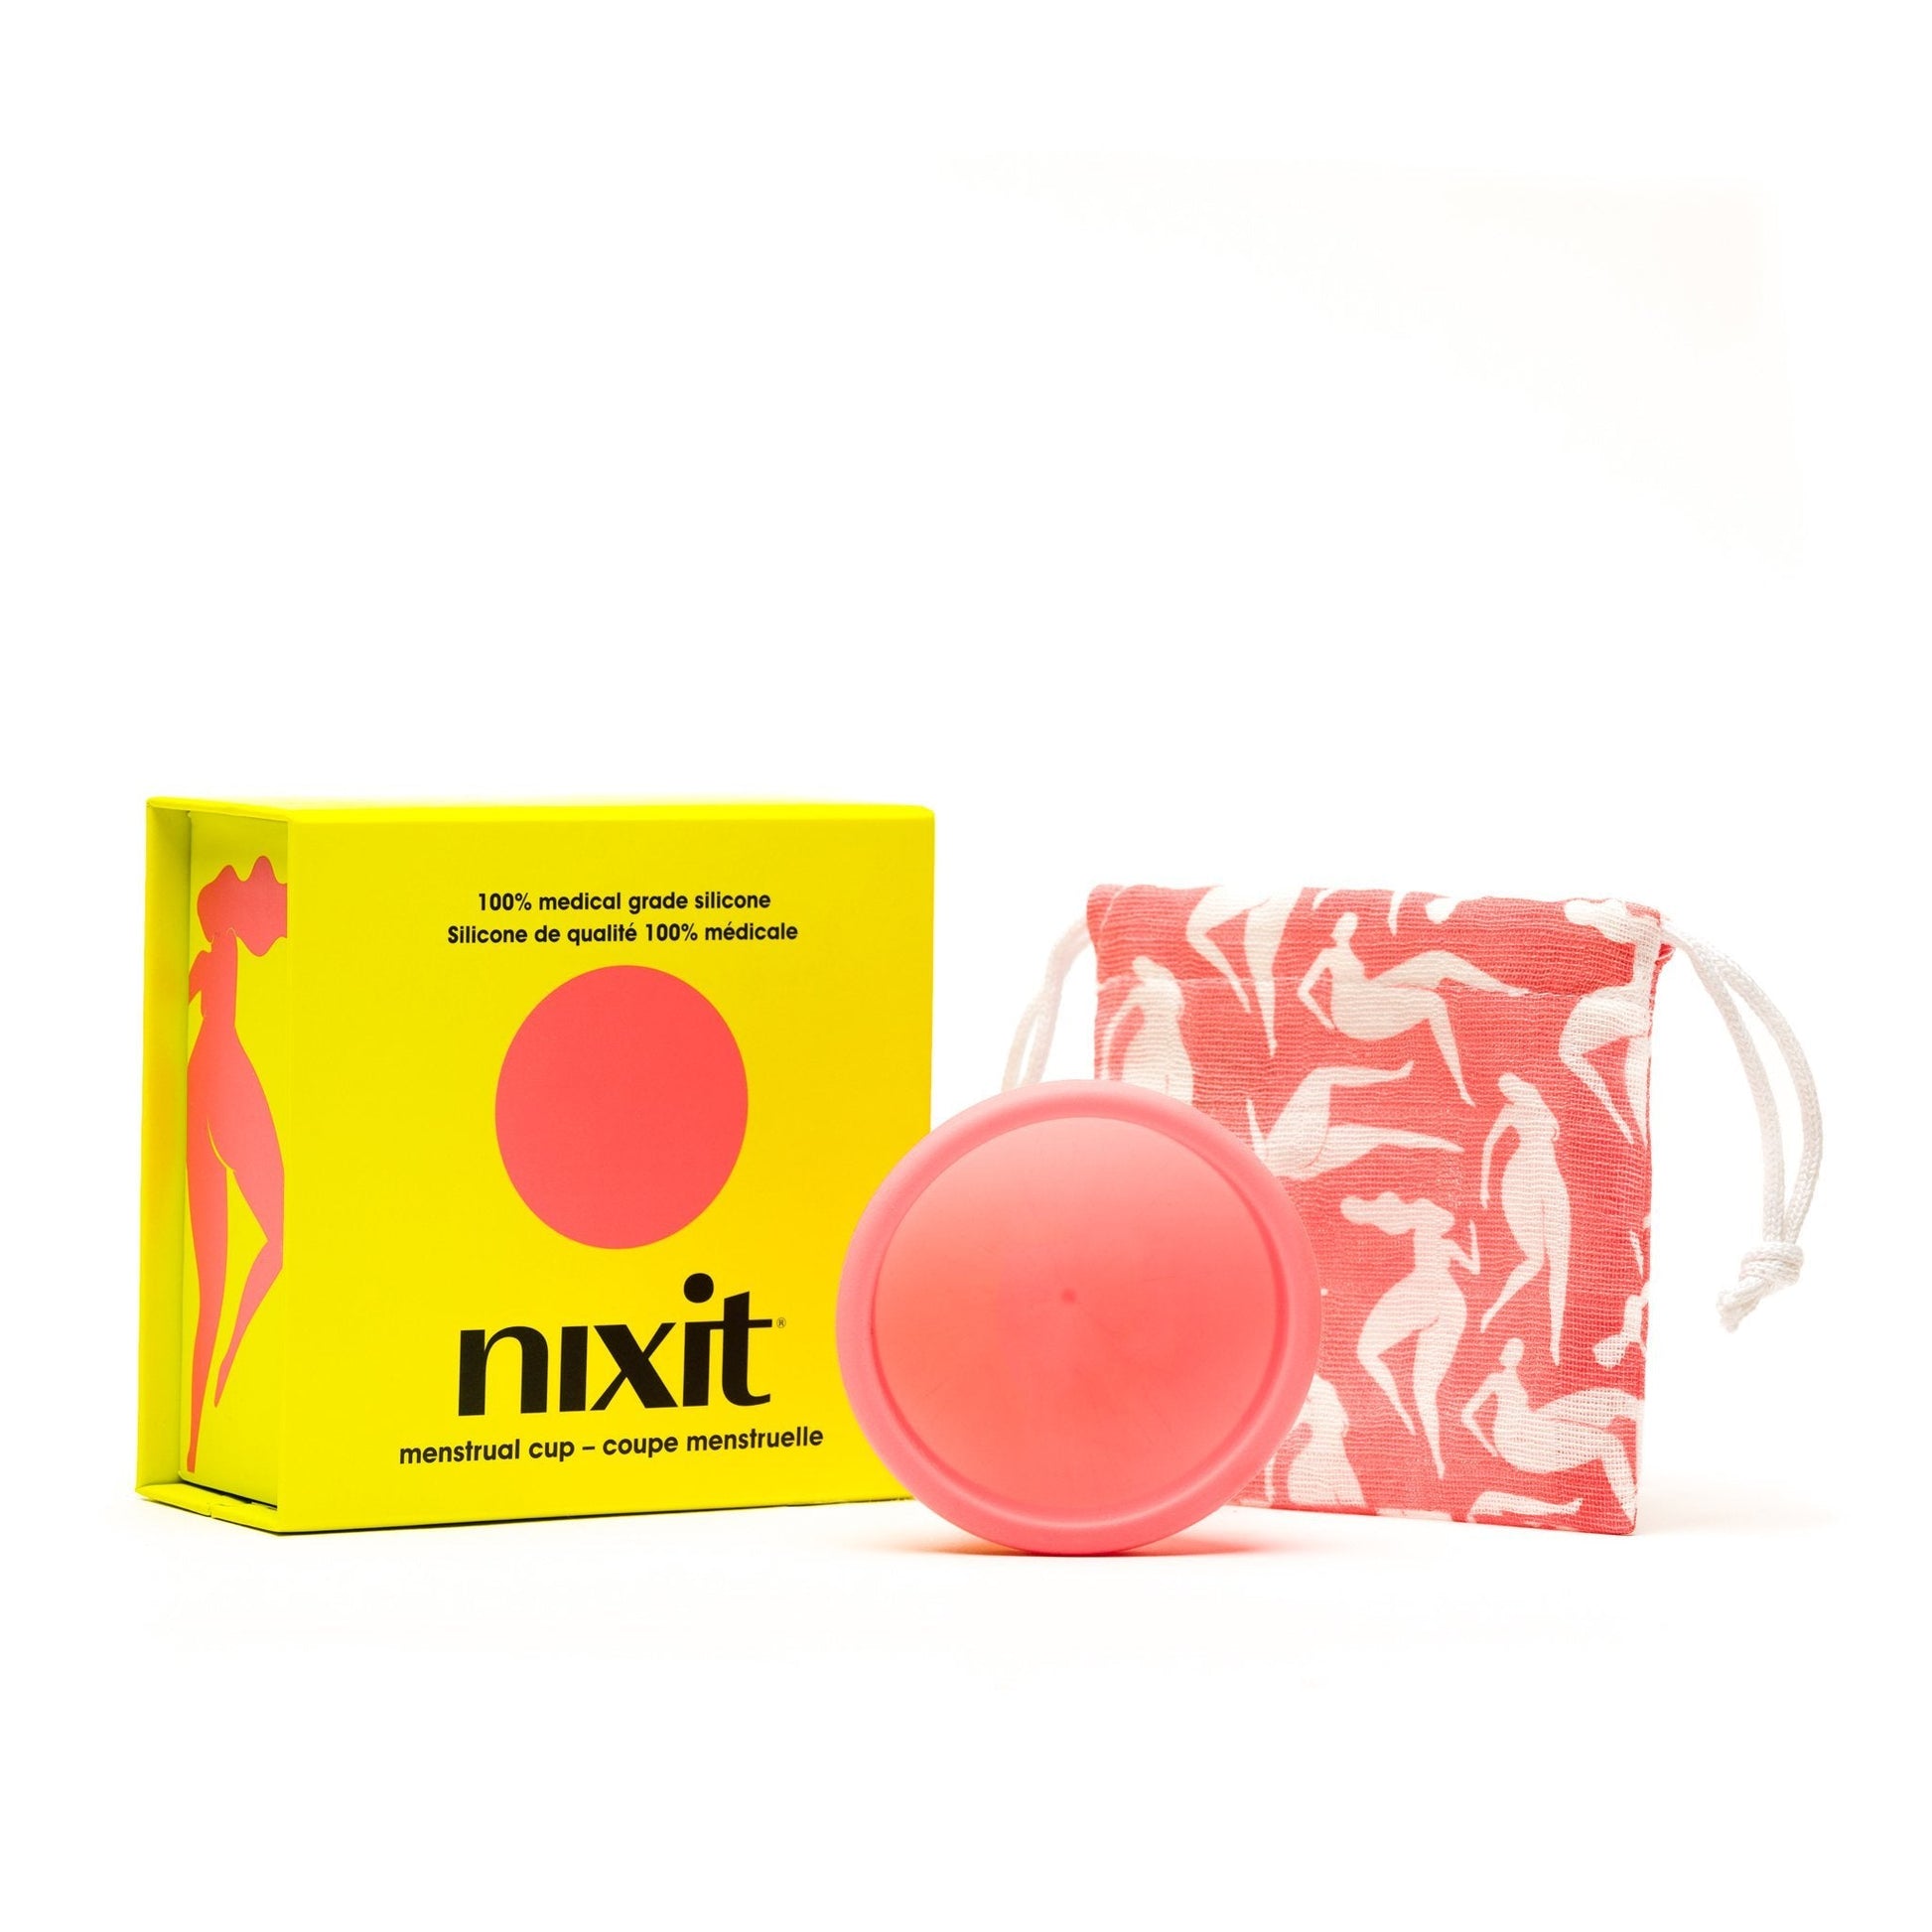 Photo of yellow nixit menstrual cup/period cup product box, and product reusable bag.